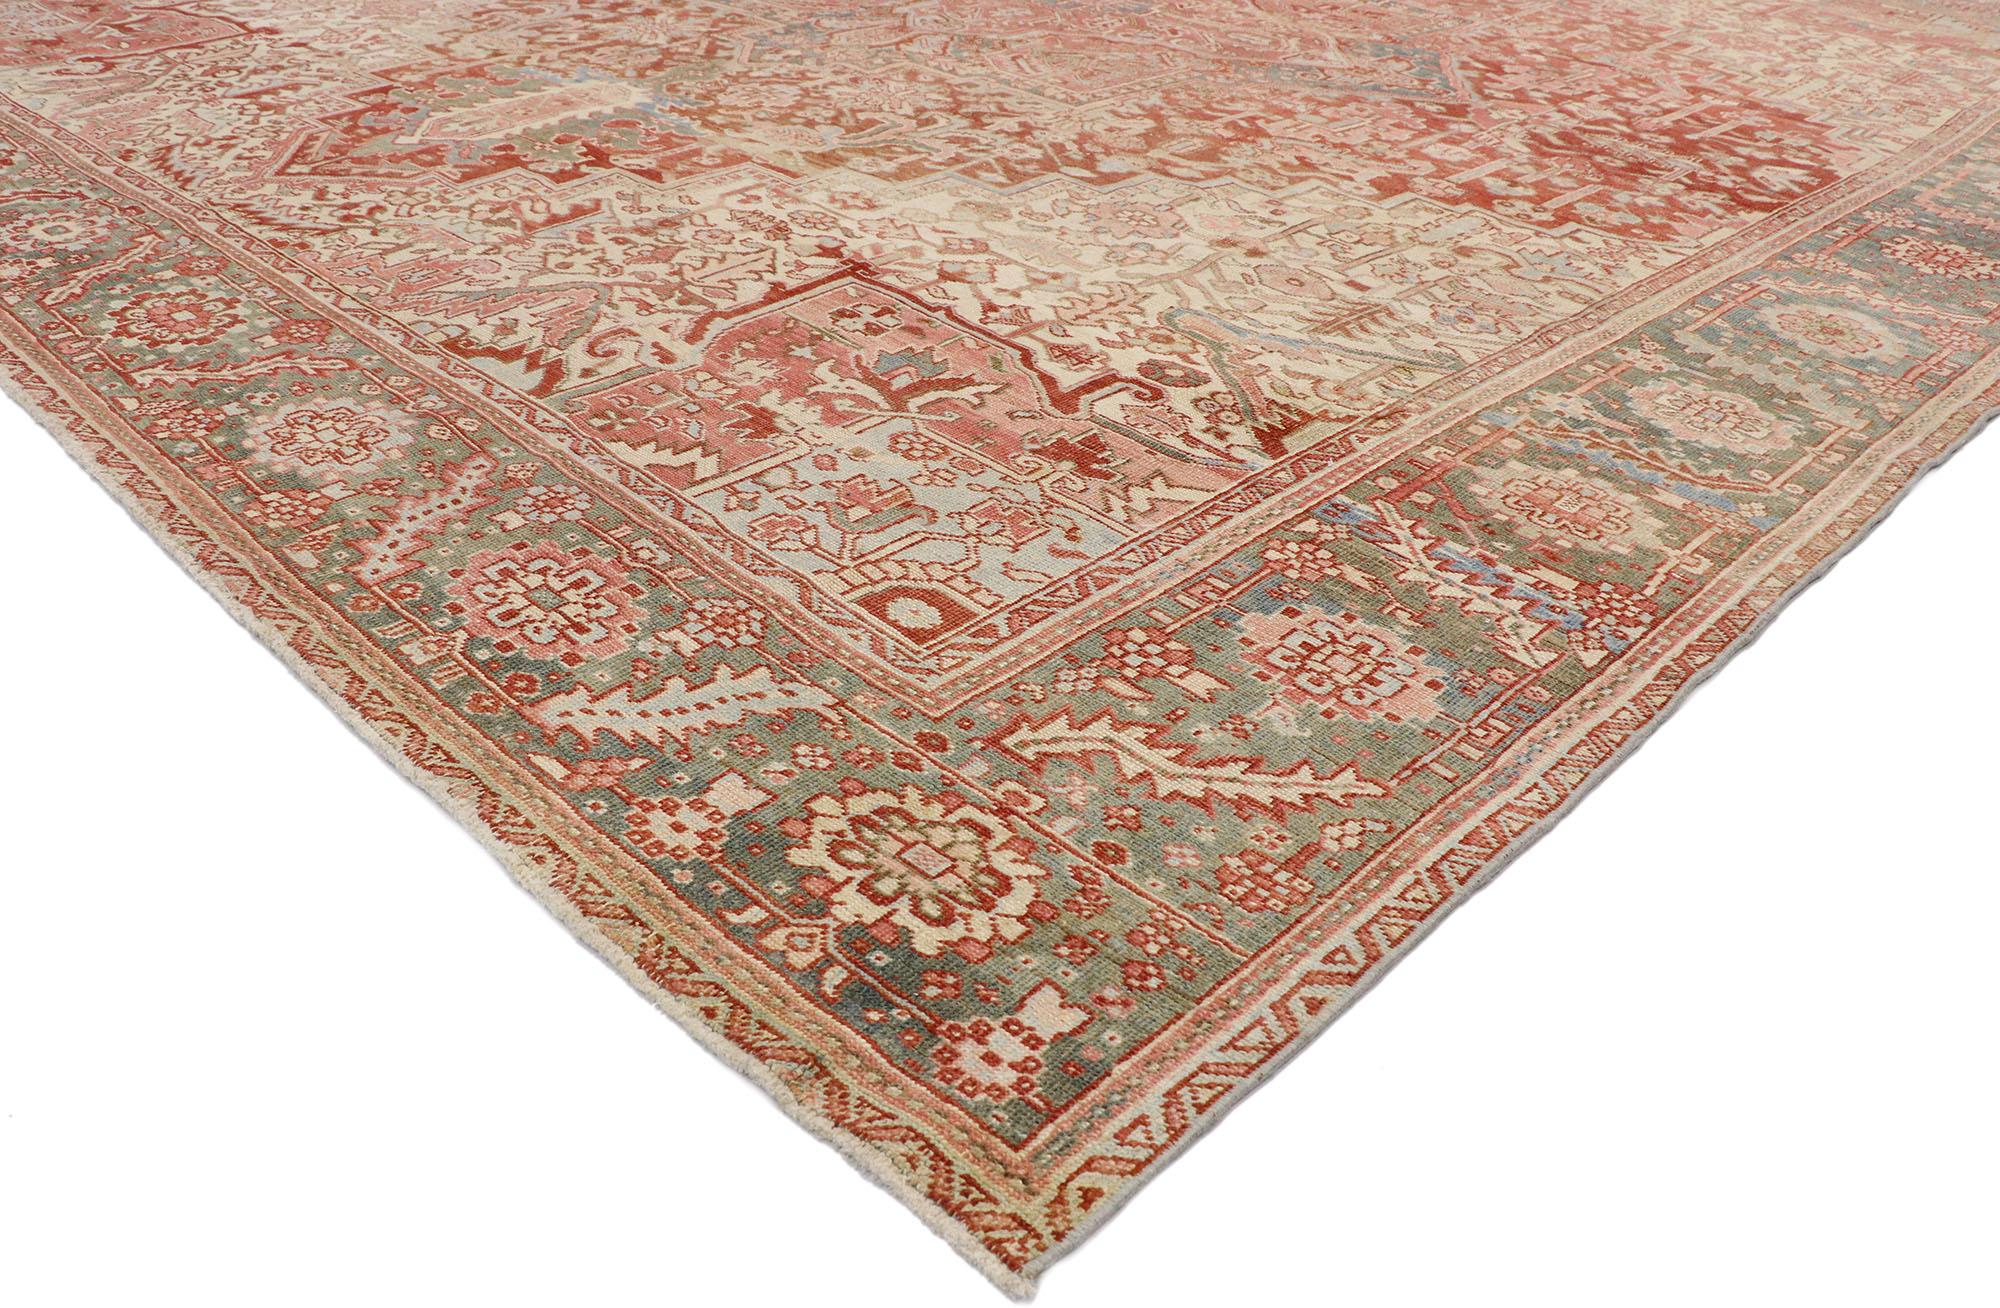 53245 Distressed Antique Persian Heriz Rug, 11'08 x 13'08. Persian Heriz rugs, hailing from northwest Iran's Heris region, are prized for their precise geometric patterns and detailed motif outlining. These rugs, crafted from premium wool sourced